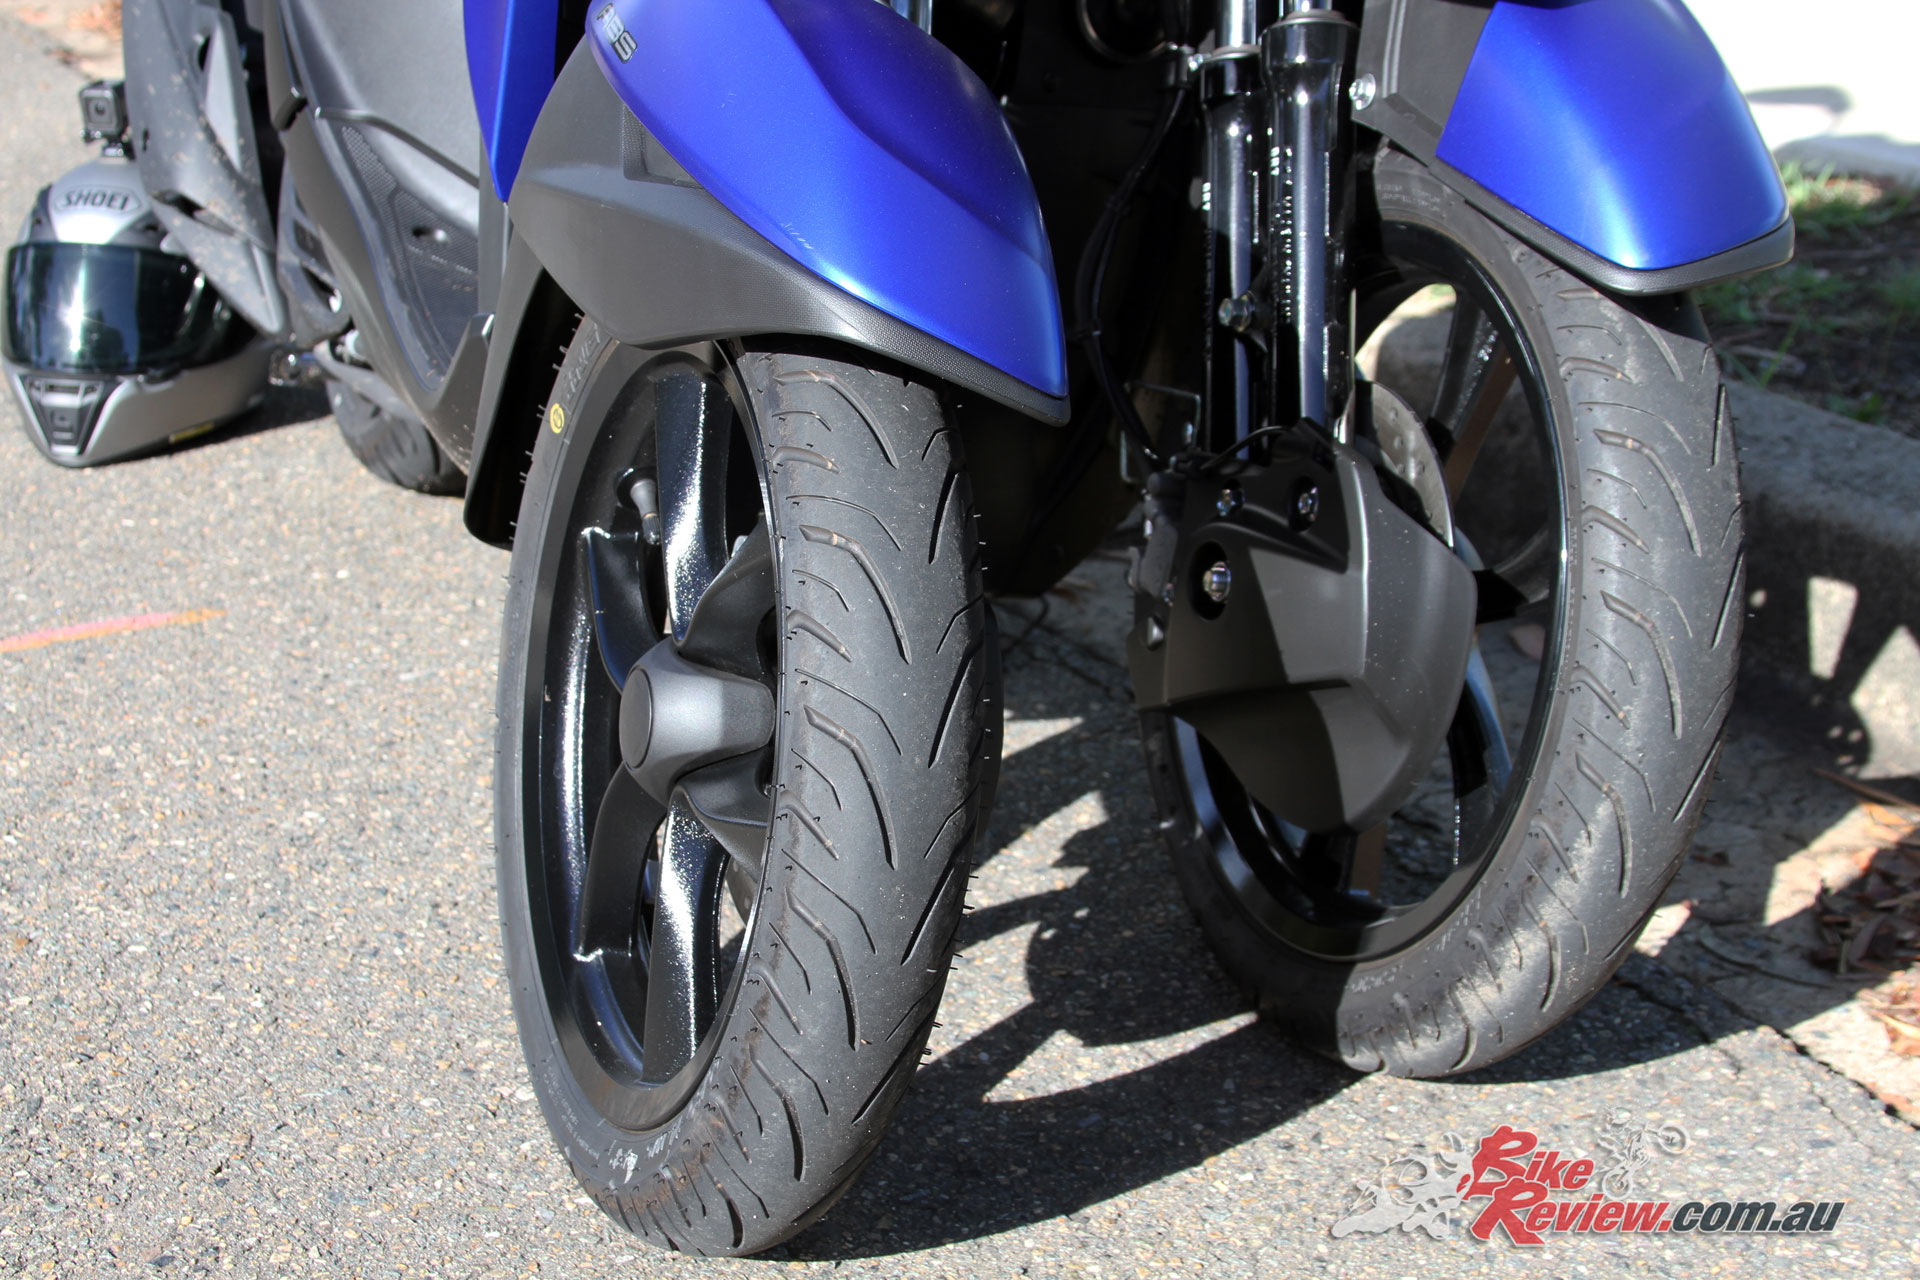 Dual front wheels are supported by dual forks on each side, with sporty 14in six-spoke wheels and a disc brake assembly on each